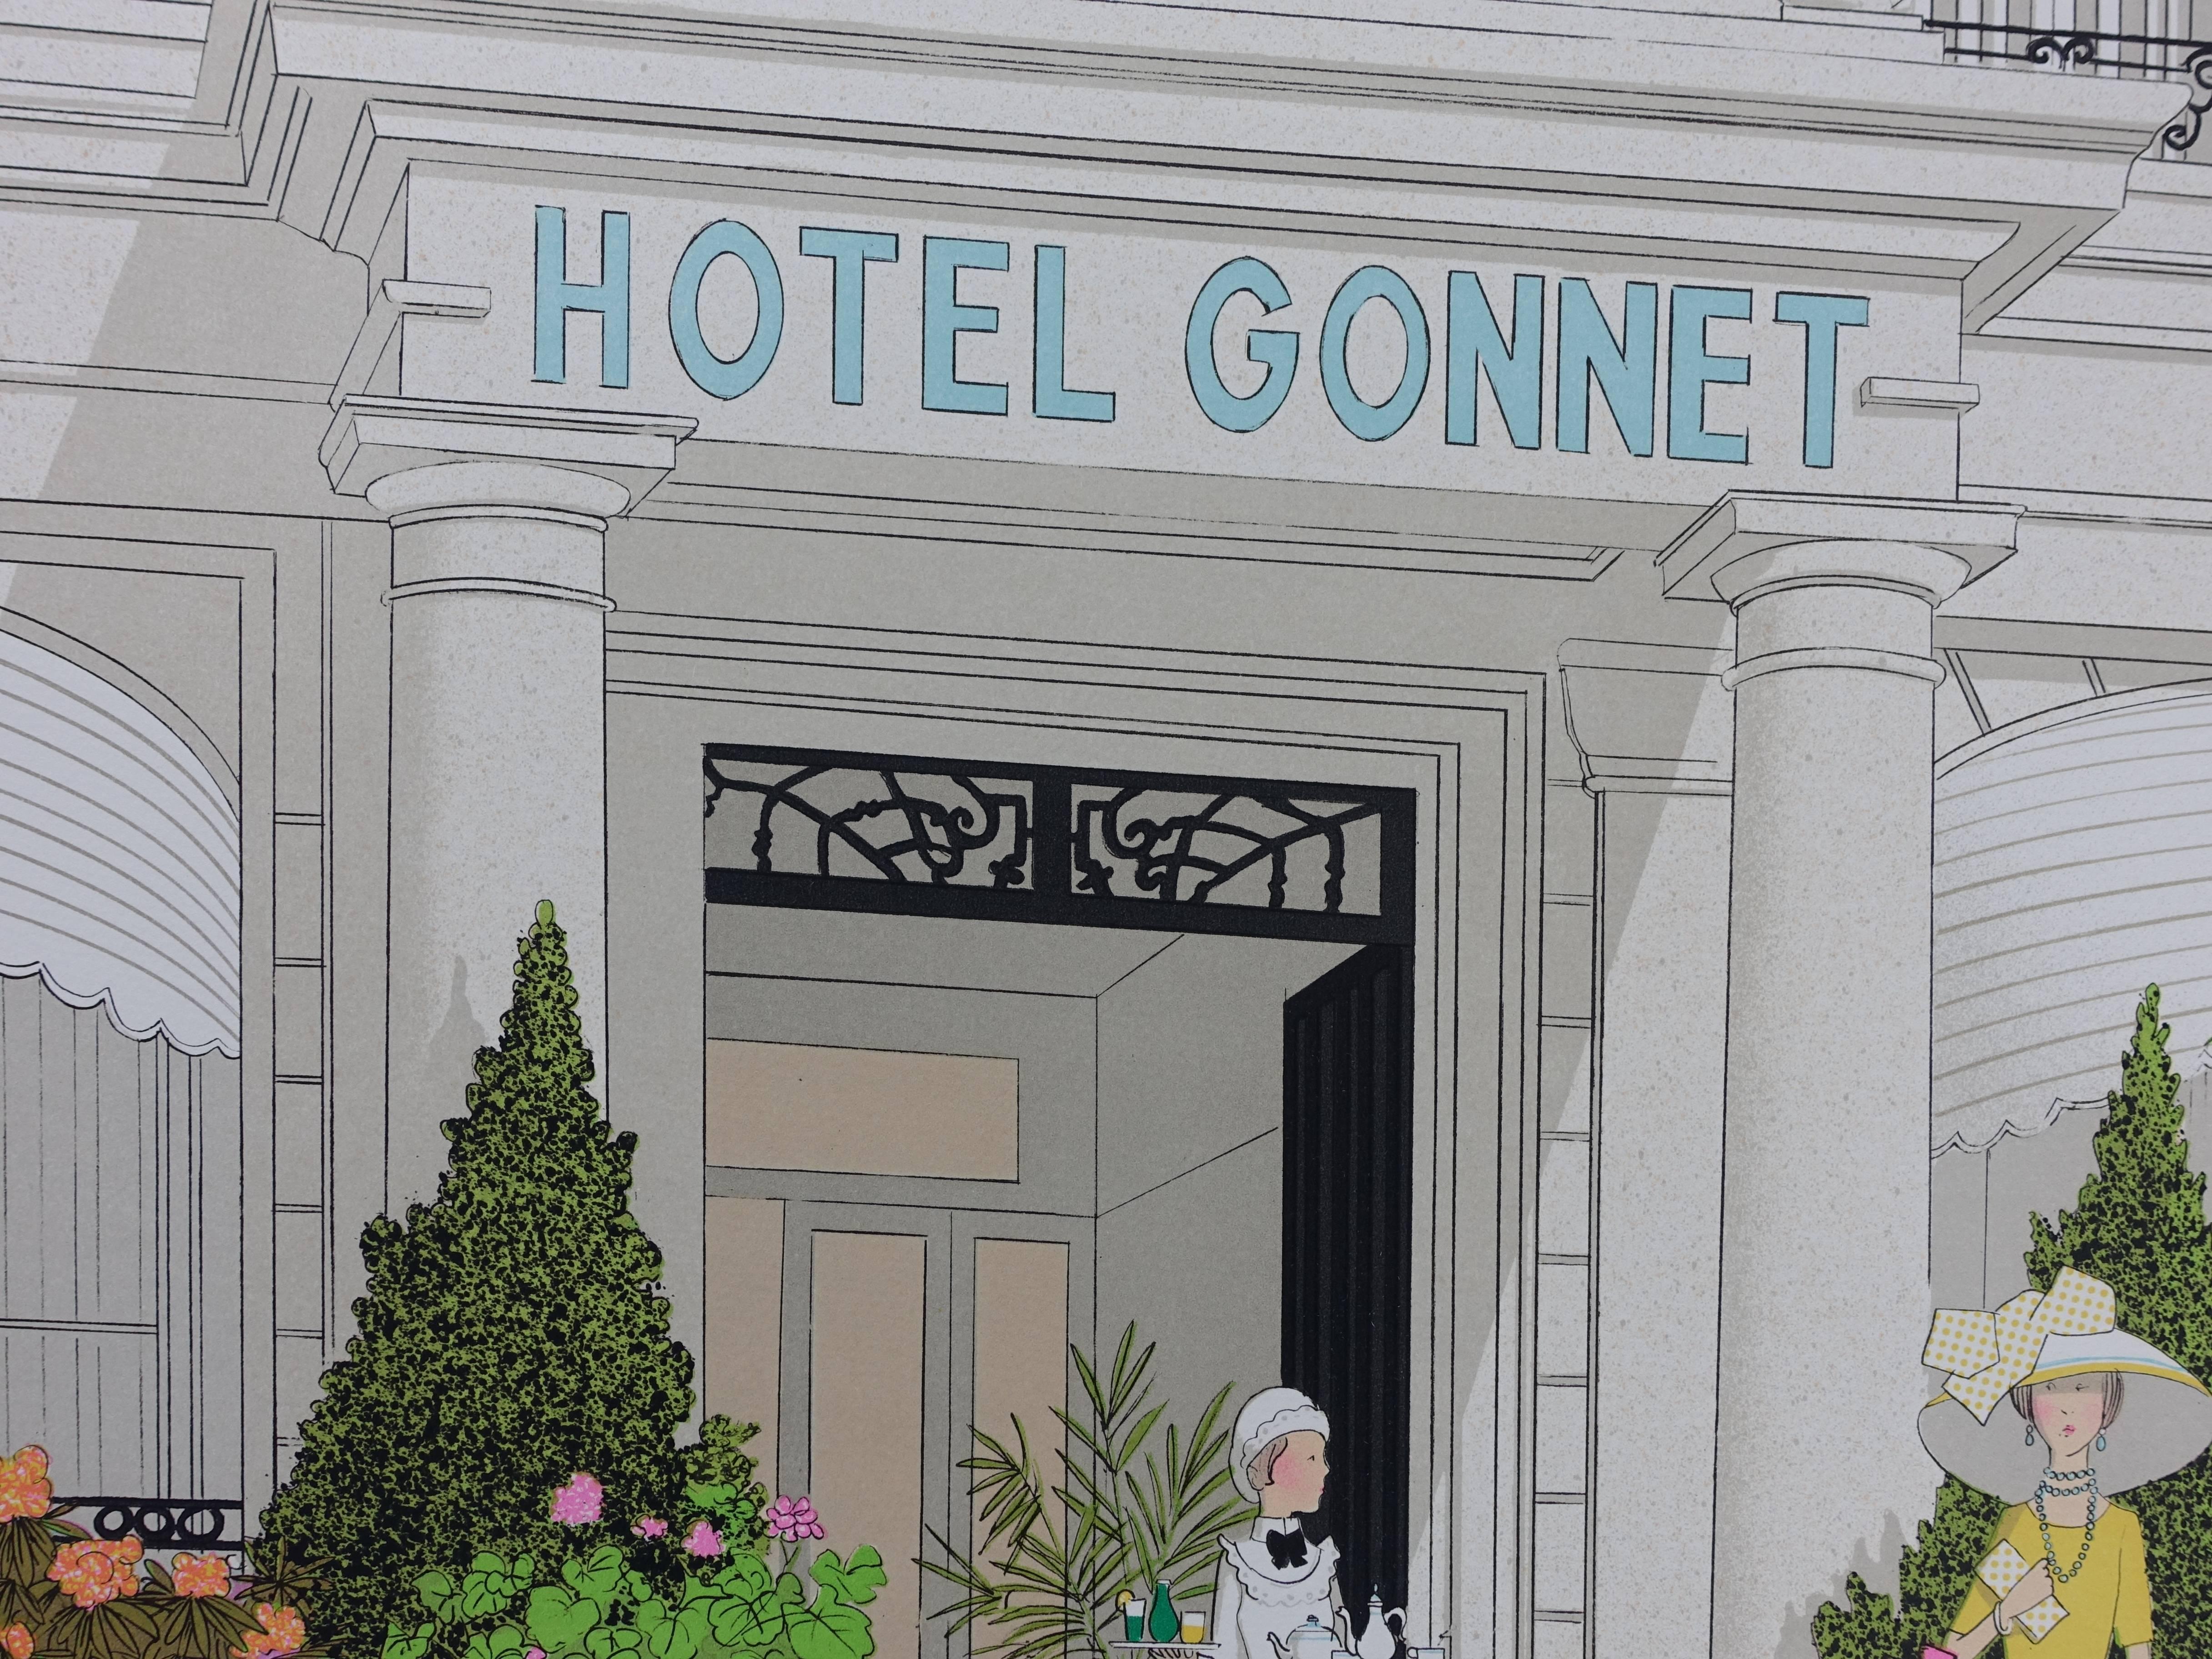 Mercedes 370 and Hotel Gonnet - Signed lithograph - 115ex - Gray Figurative Print by Denis Paul Noyer